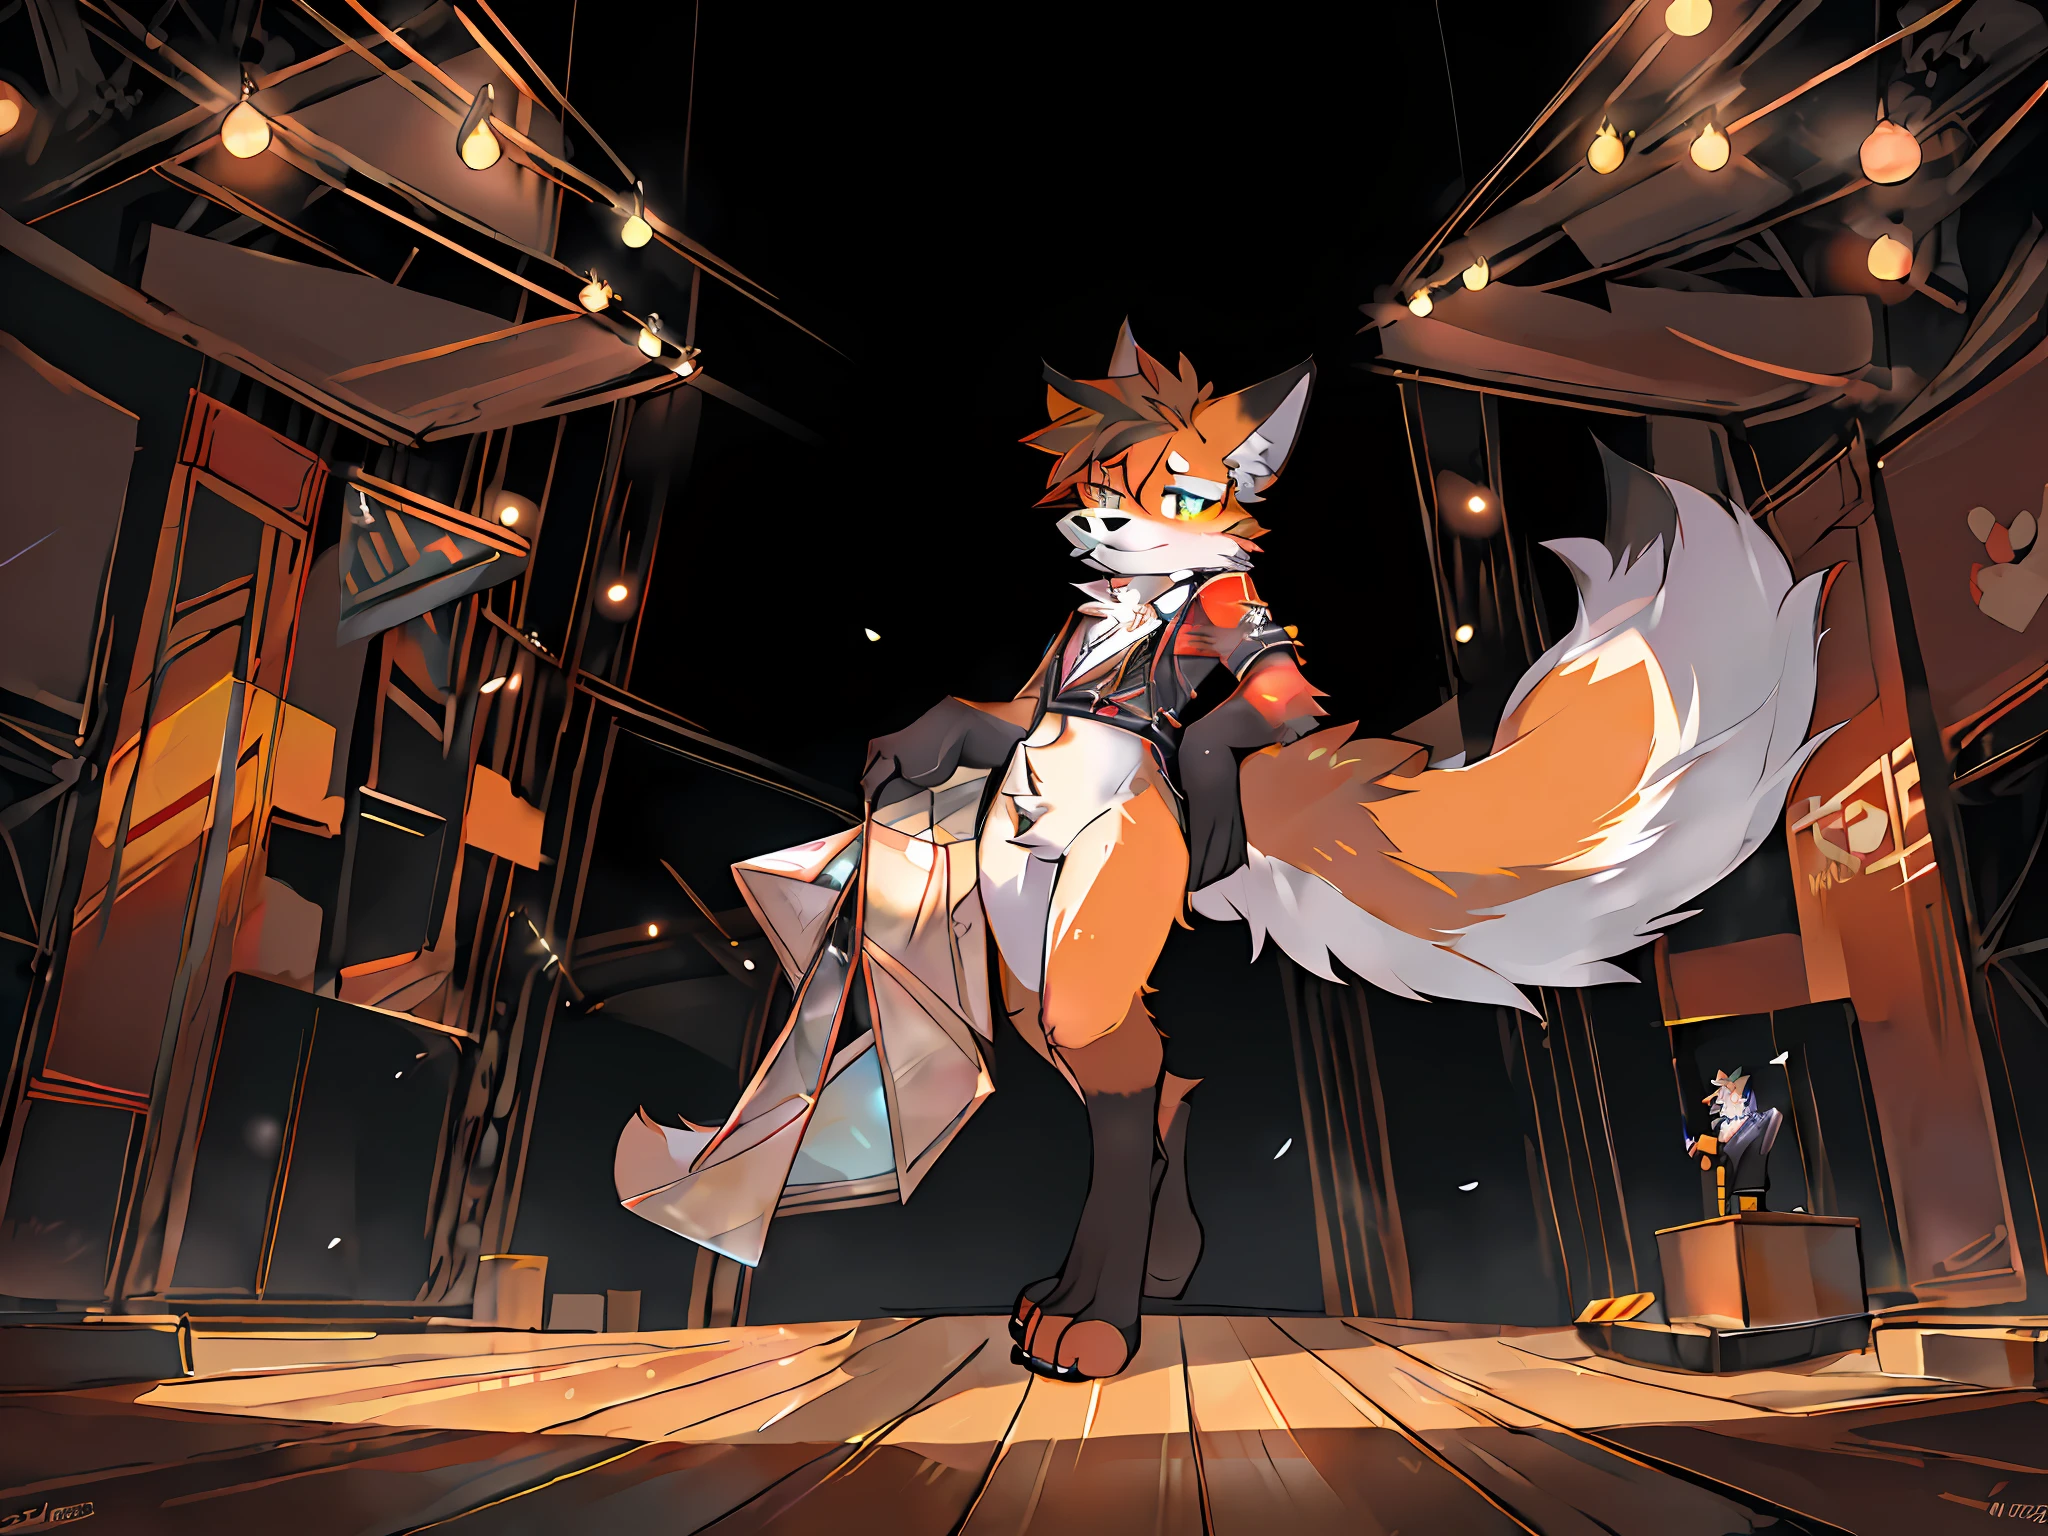 anime - style illustration of a fox in a suit and tie standing on a stage, an anthropomorphic cyberpunk fox, very very beautiful furry art, an anthro fox, commission for high res, fursona furry art commission, fursona art, fursona commission, furries wearing tails, an anthropomorphic fox, pov furry art, art of silverfox